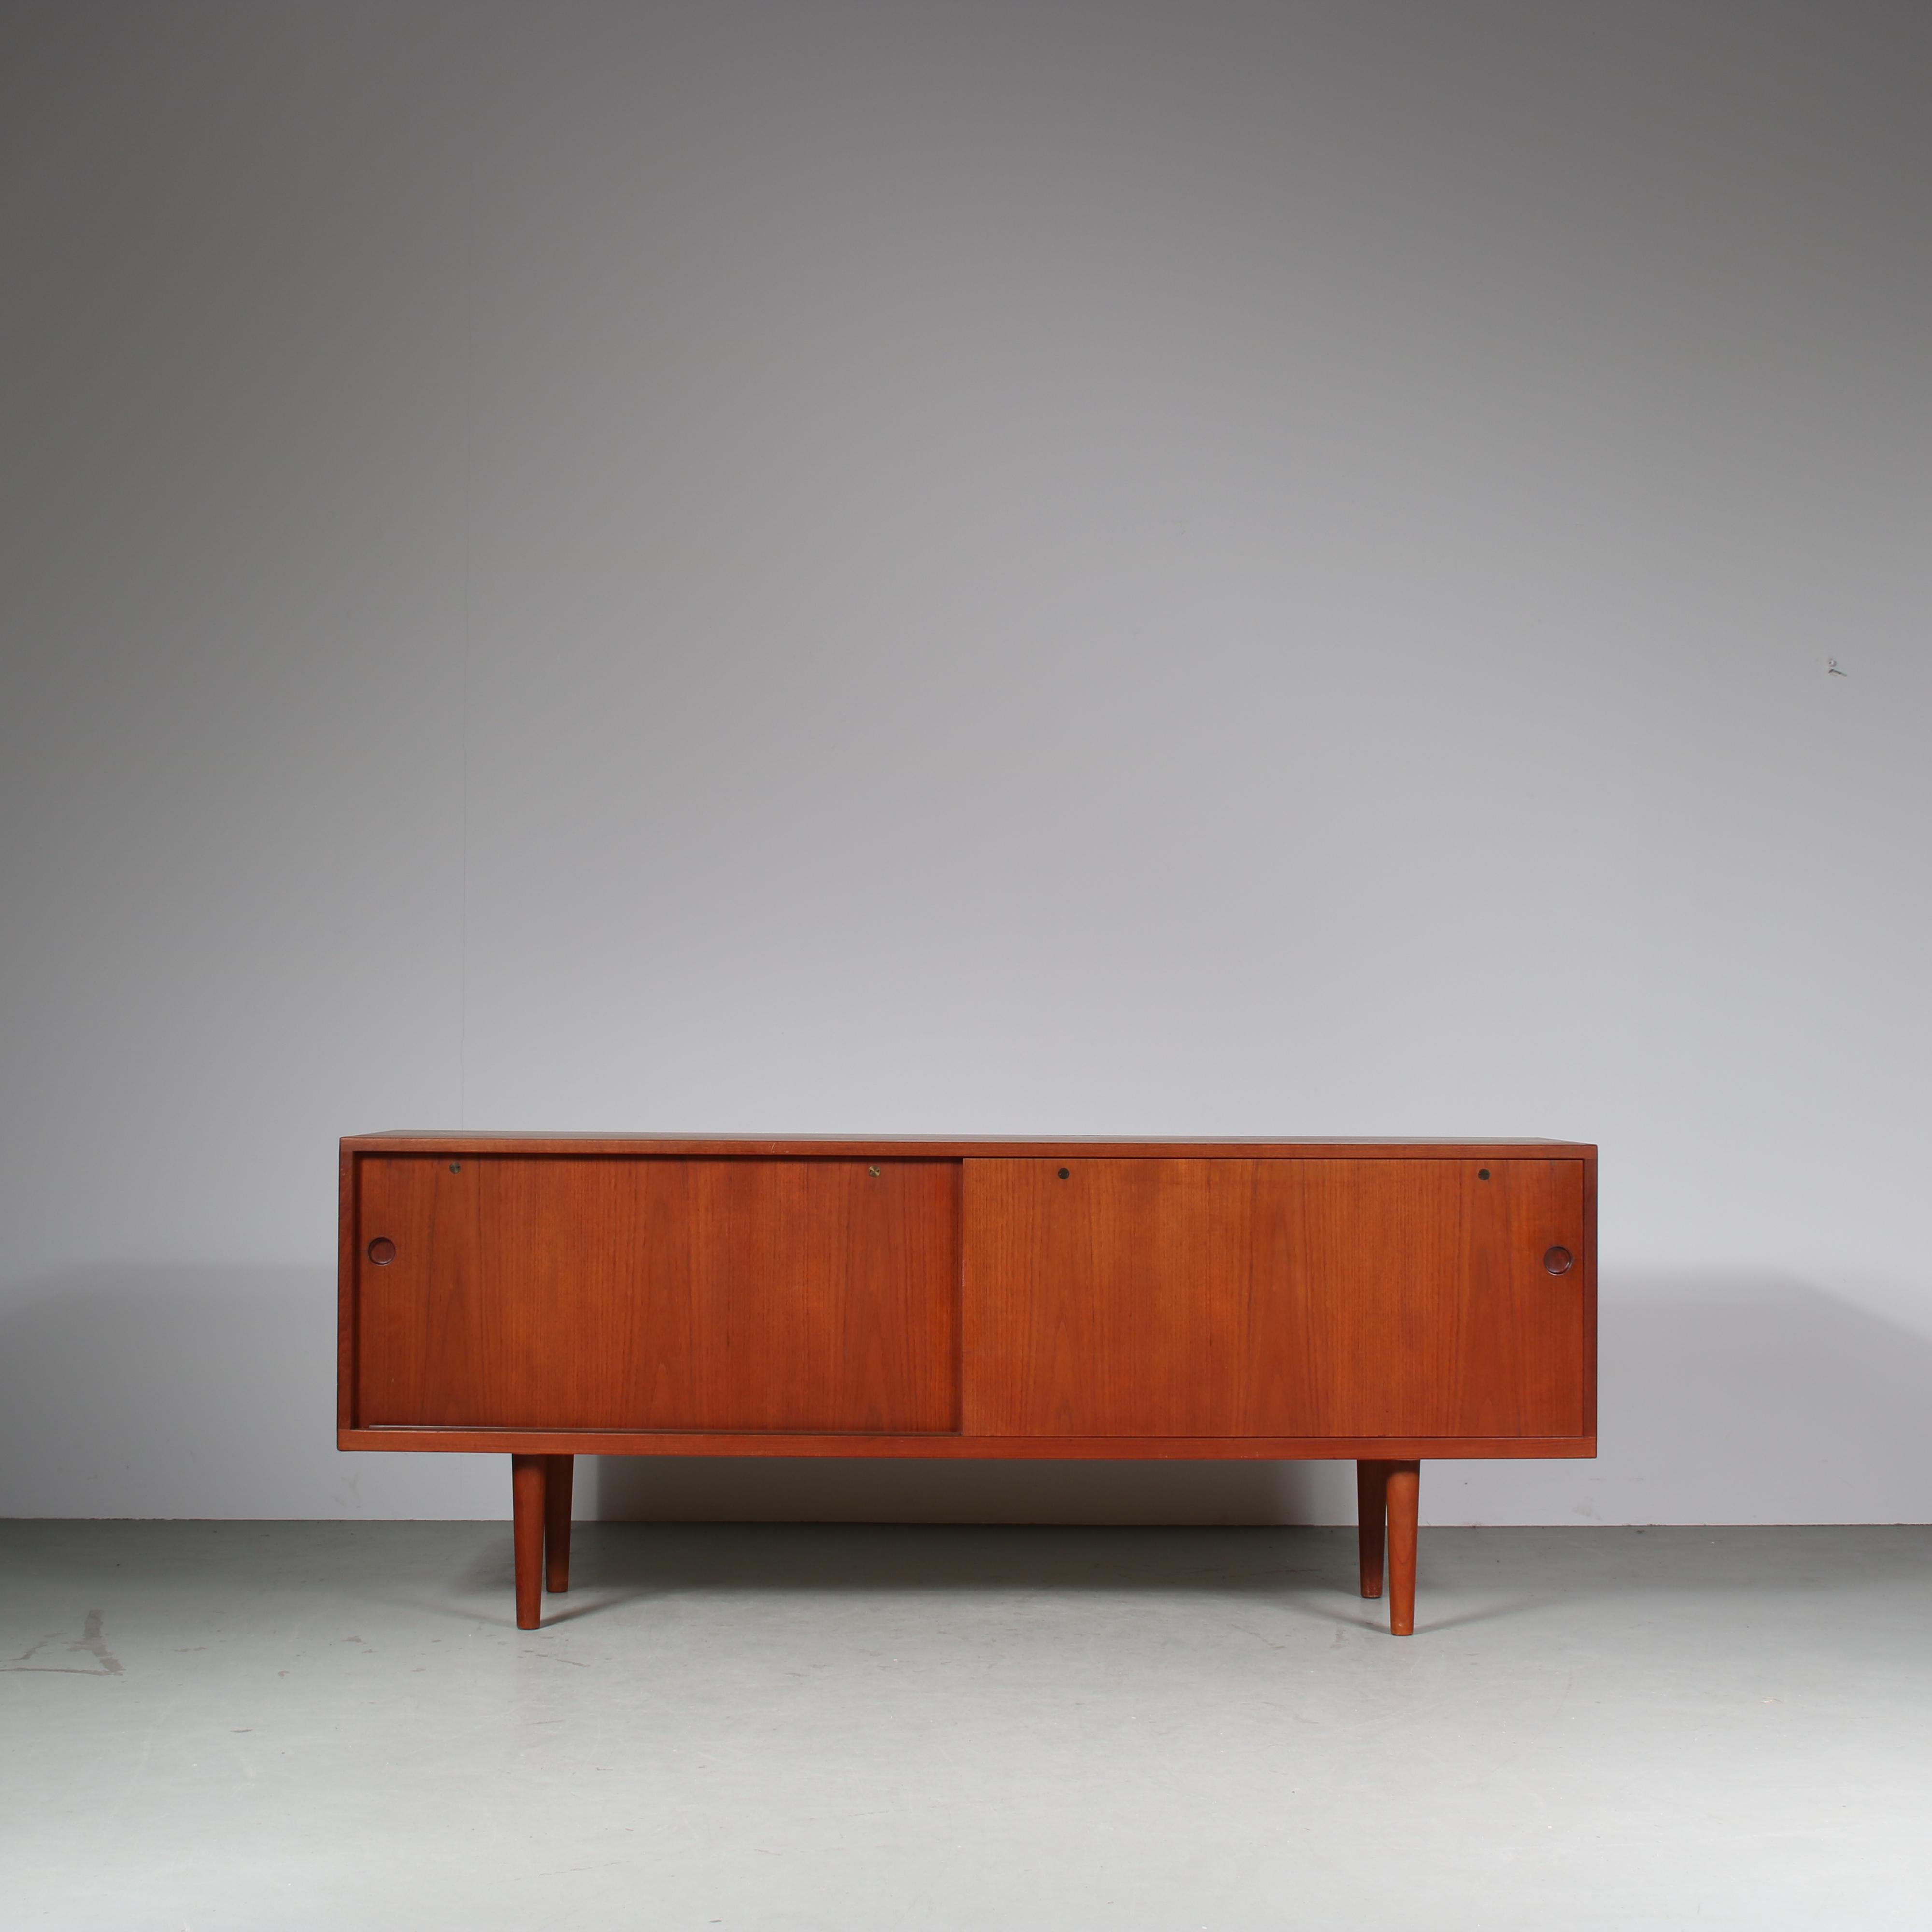 A lovely sideboard, model 26, designed by Hans J. Wegner, manufactured by RY Mobler in Denmark around 1960.

This appealing piece has a minimalist yet modern style. Made of high quality, warm brown teak wood in a rectangular shape with gently